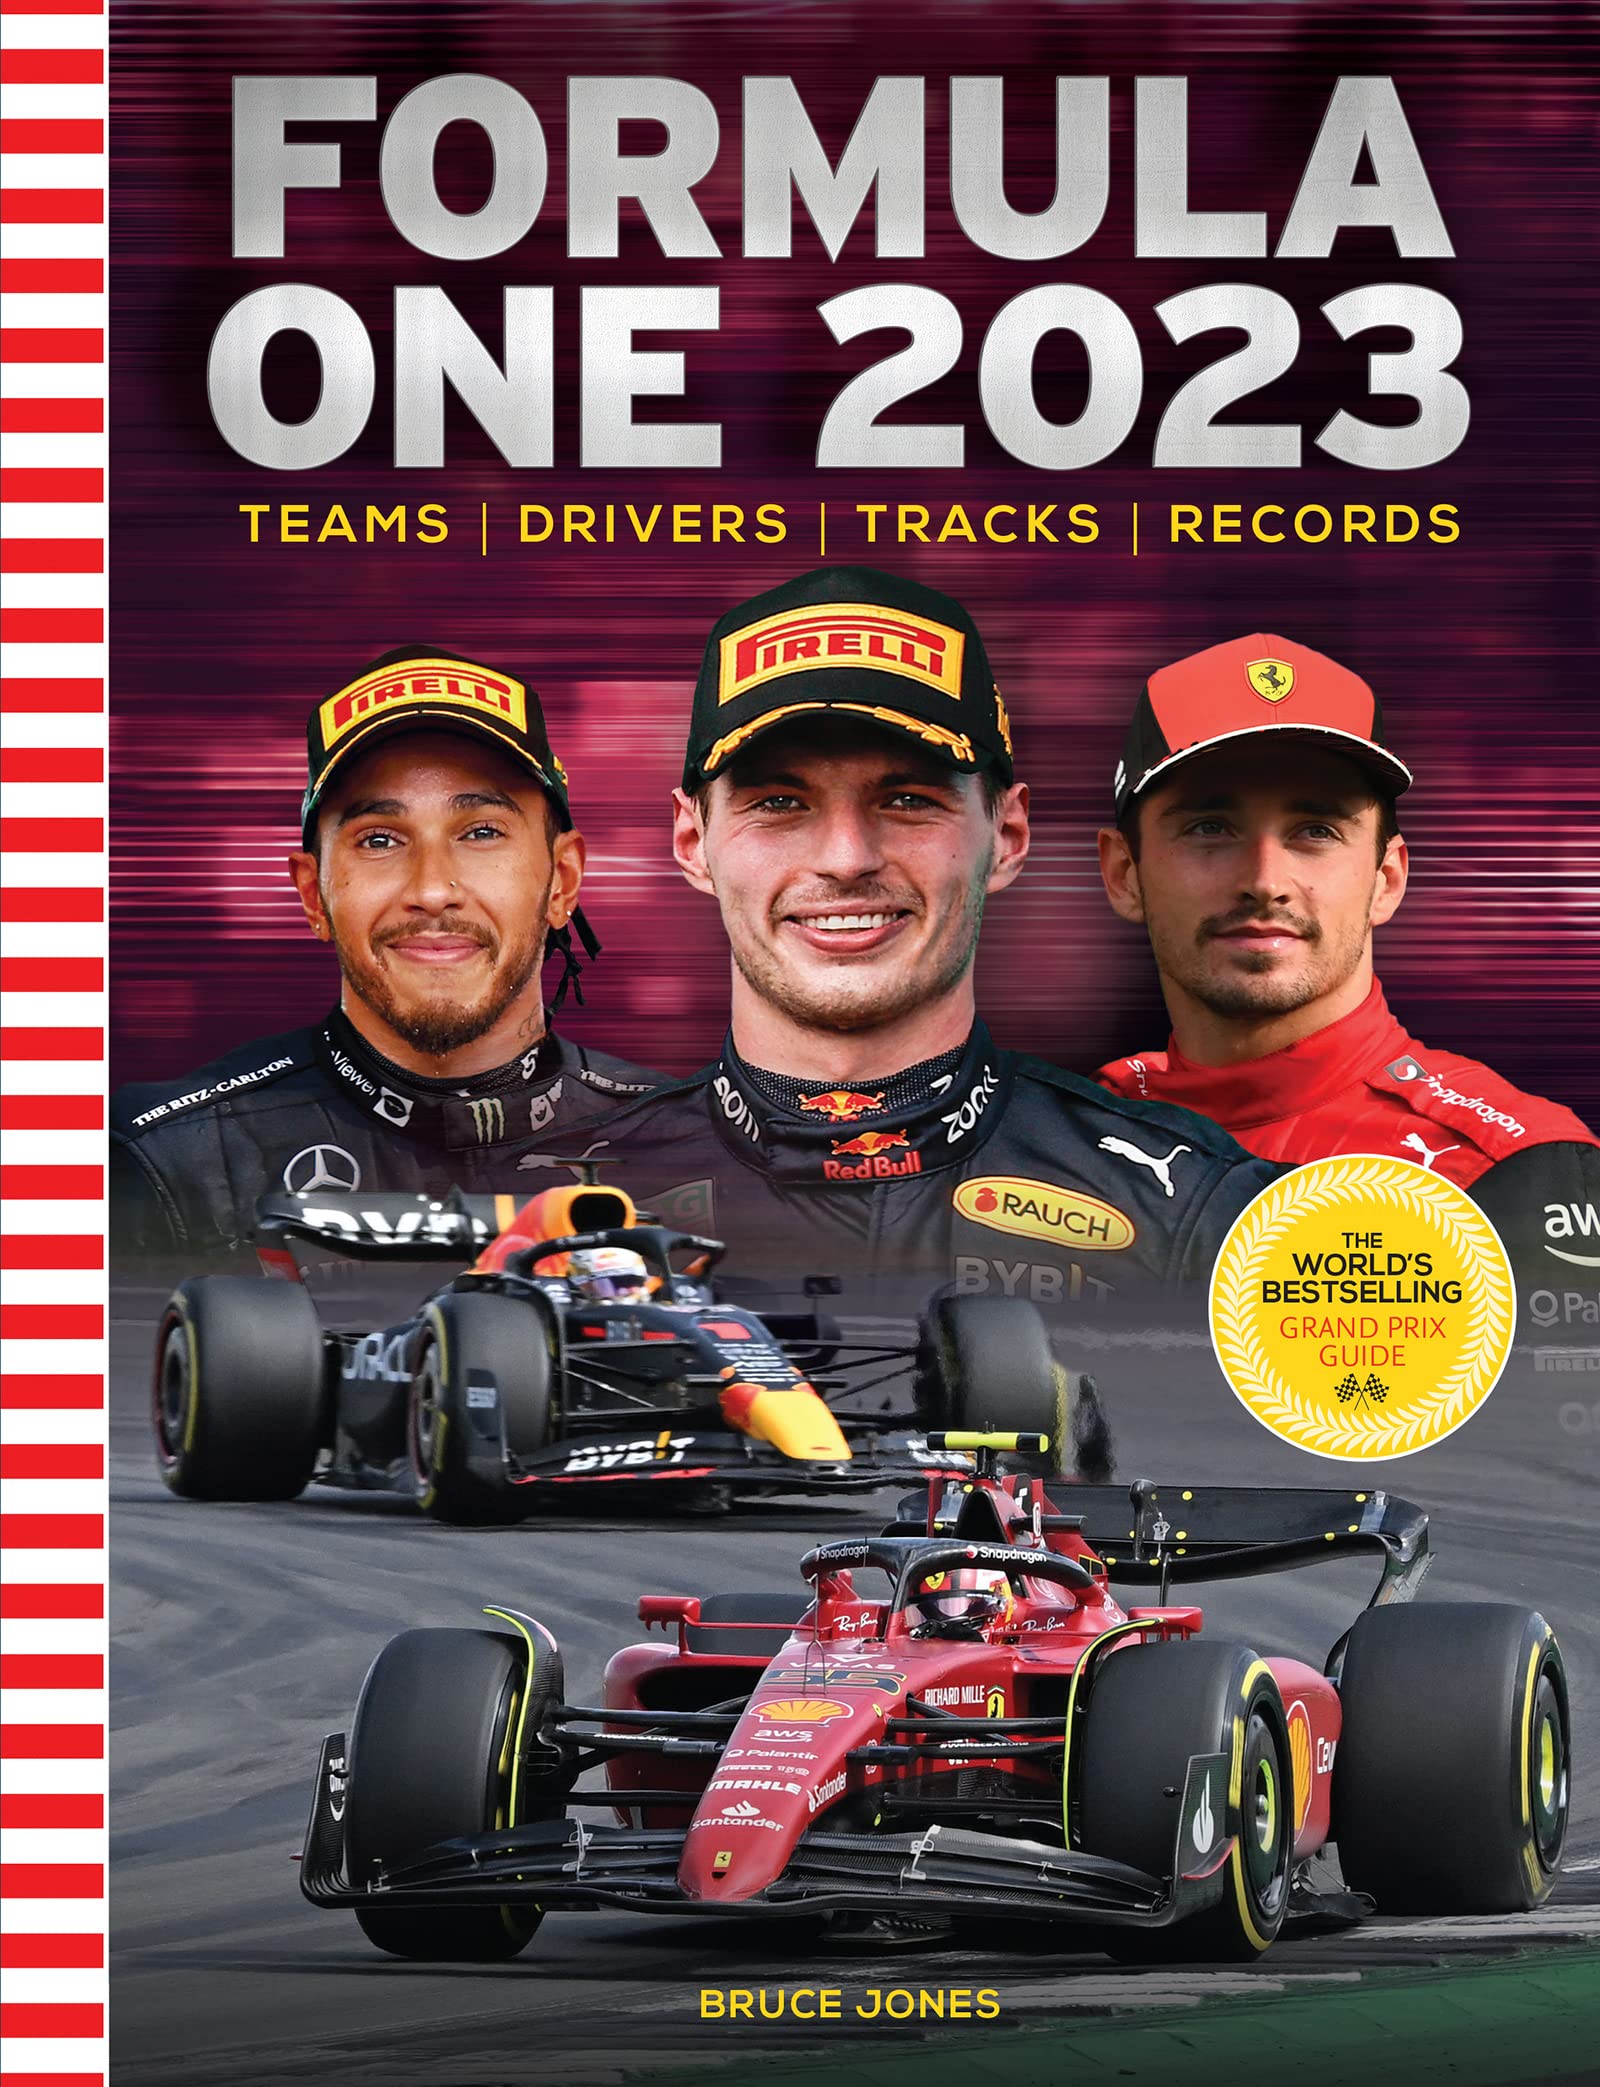 Classification of the Formula 1 World Championship of drivers 2023